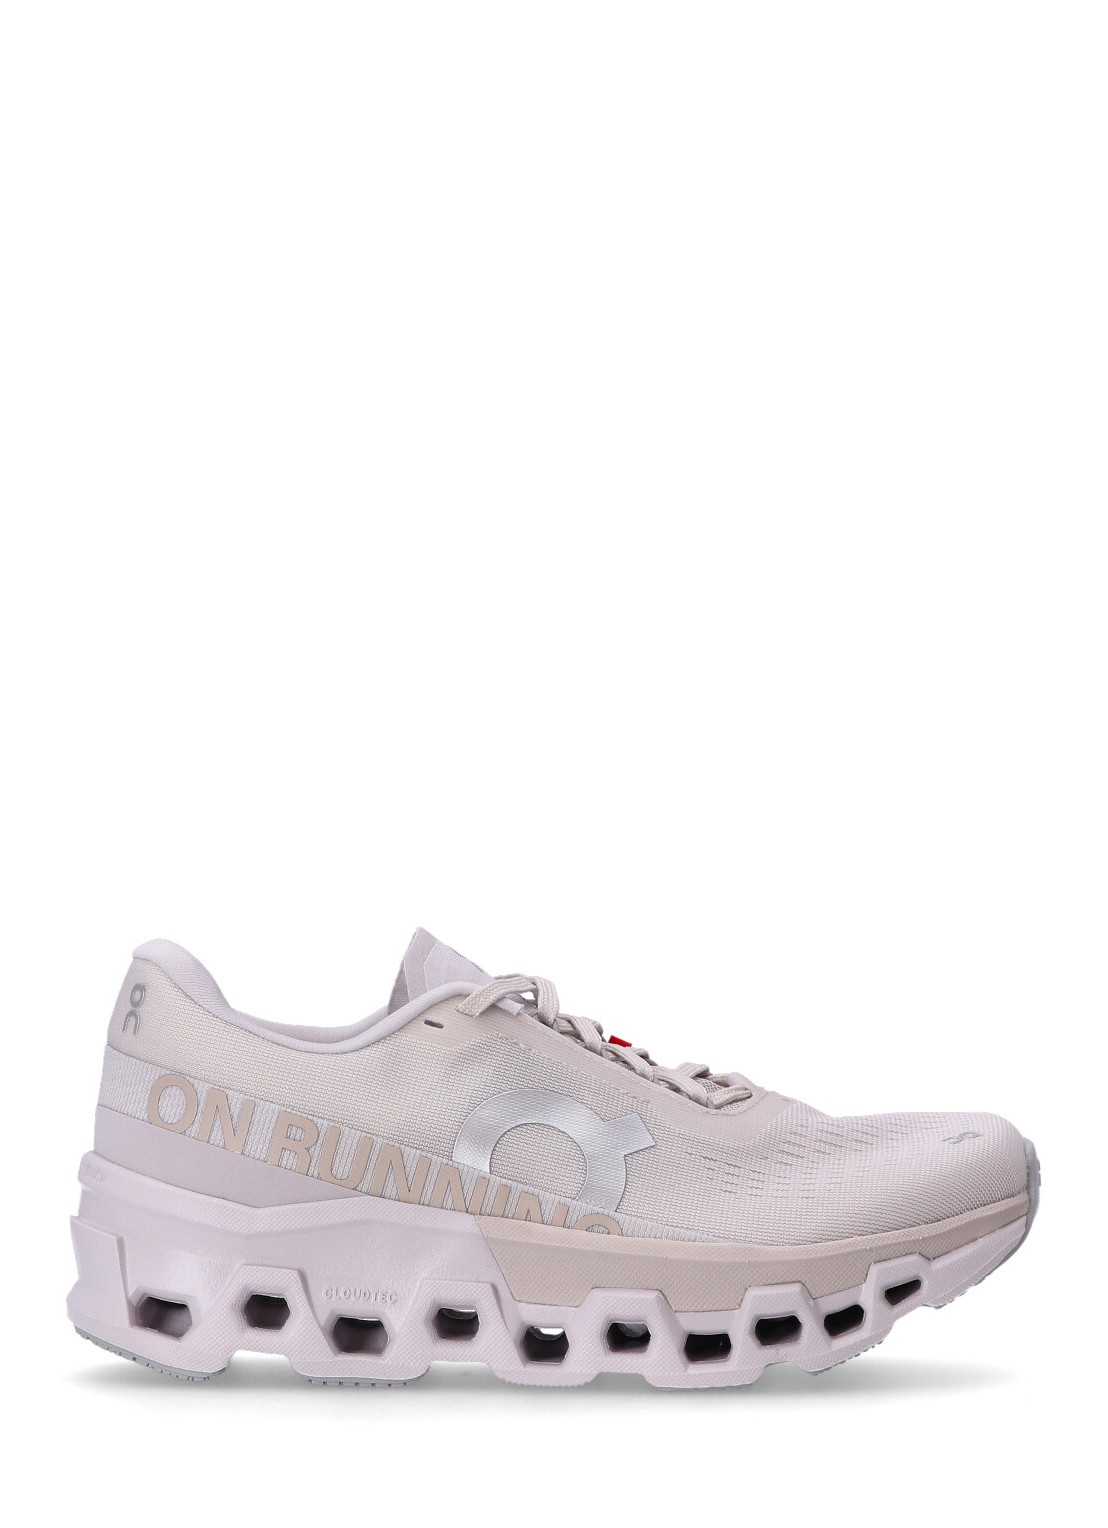 Sneaker on running sneaker woman cloudmonster 2 pad exclusive 3we10110838 sand frost talla 39
 